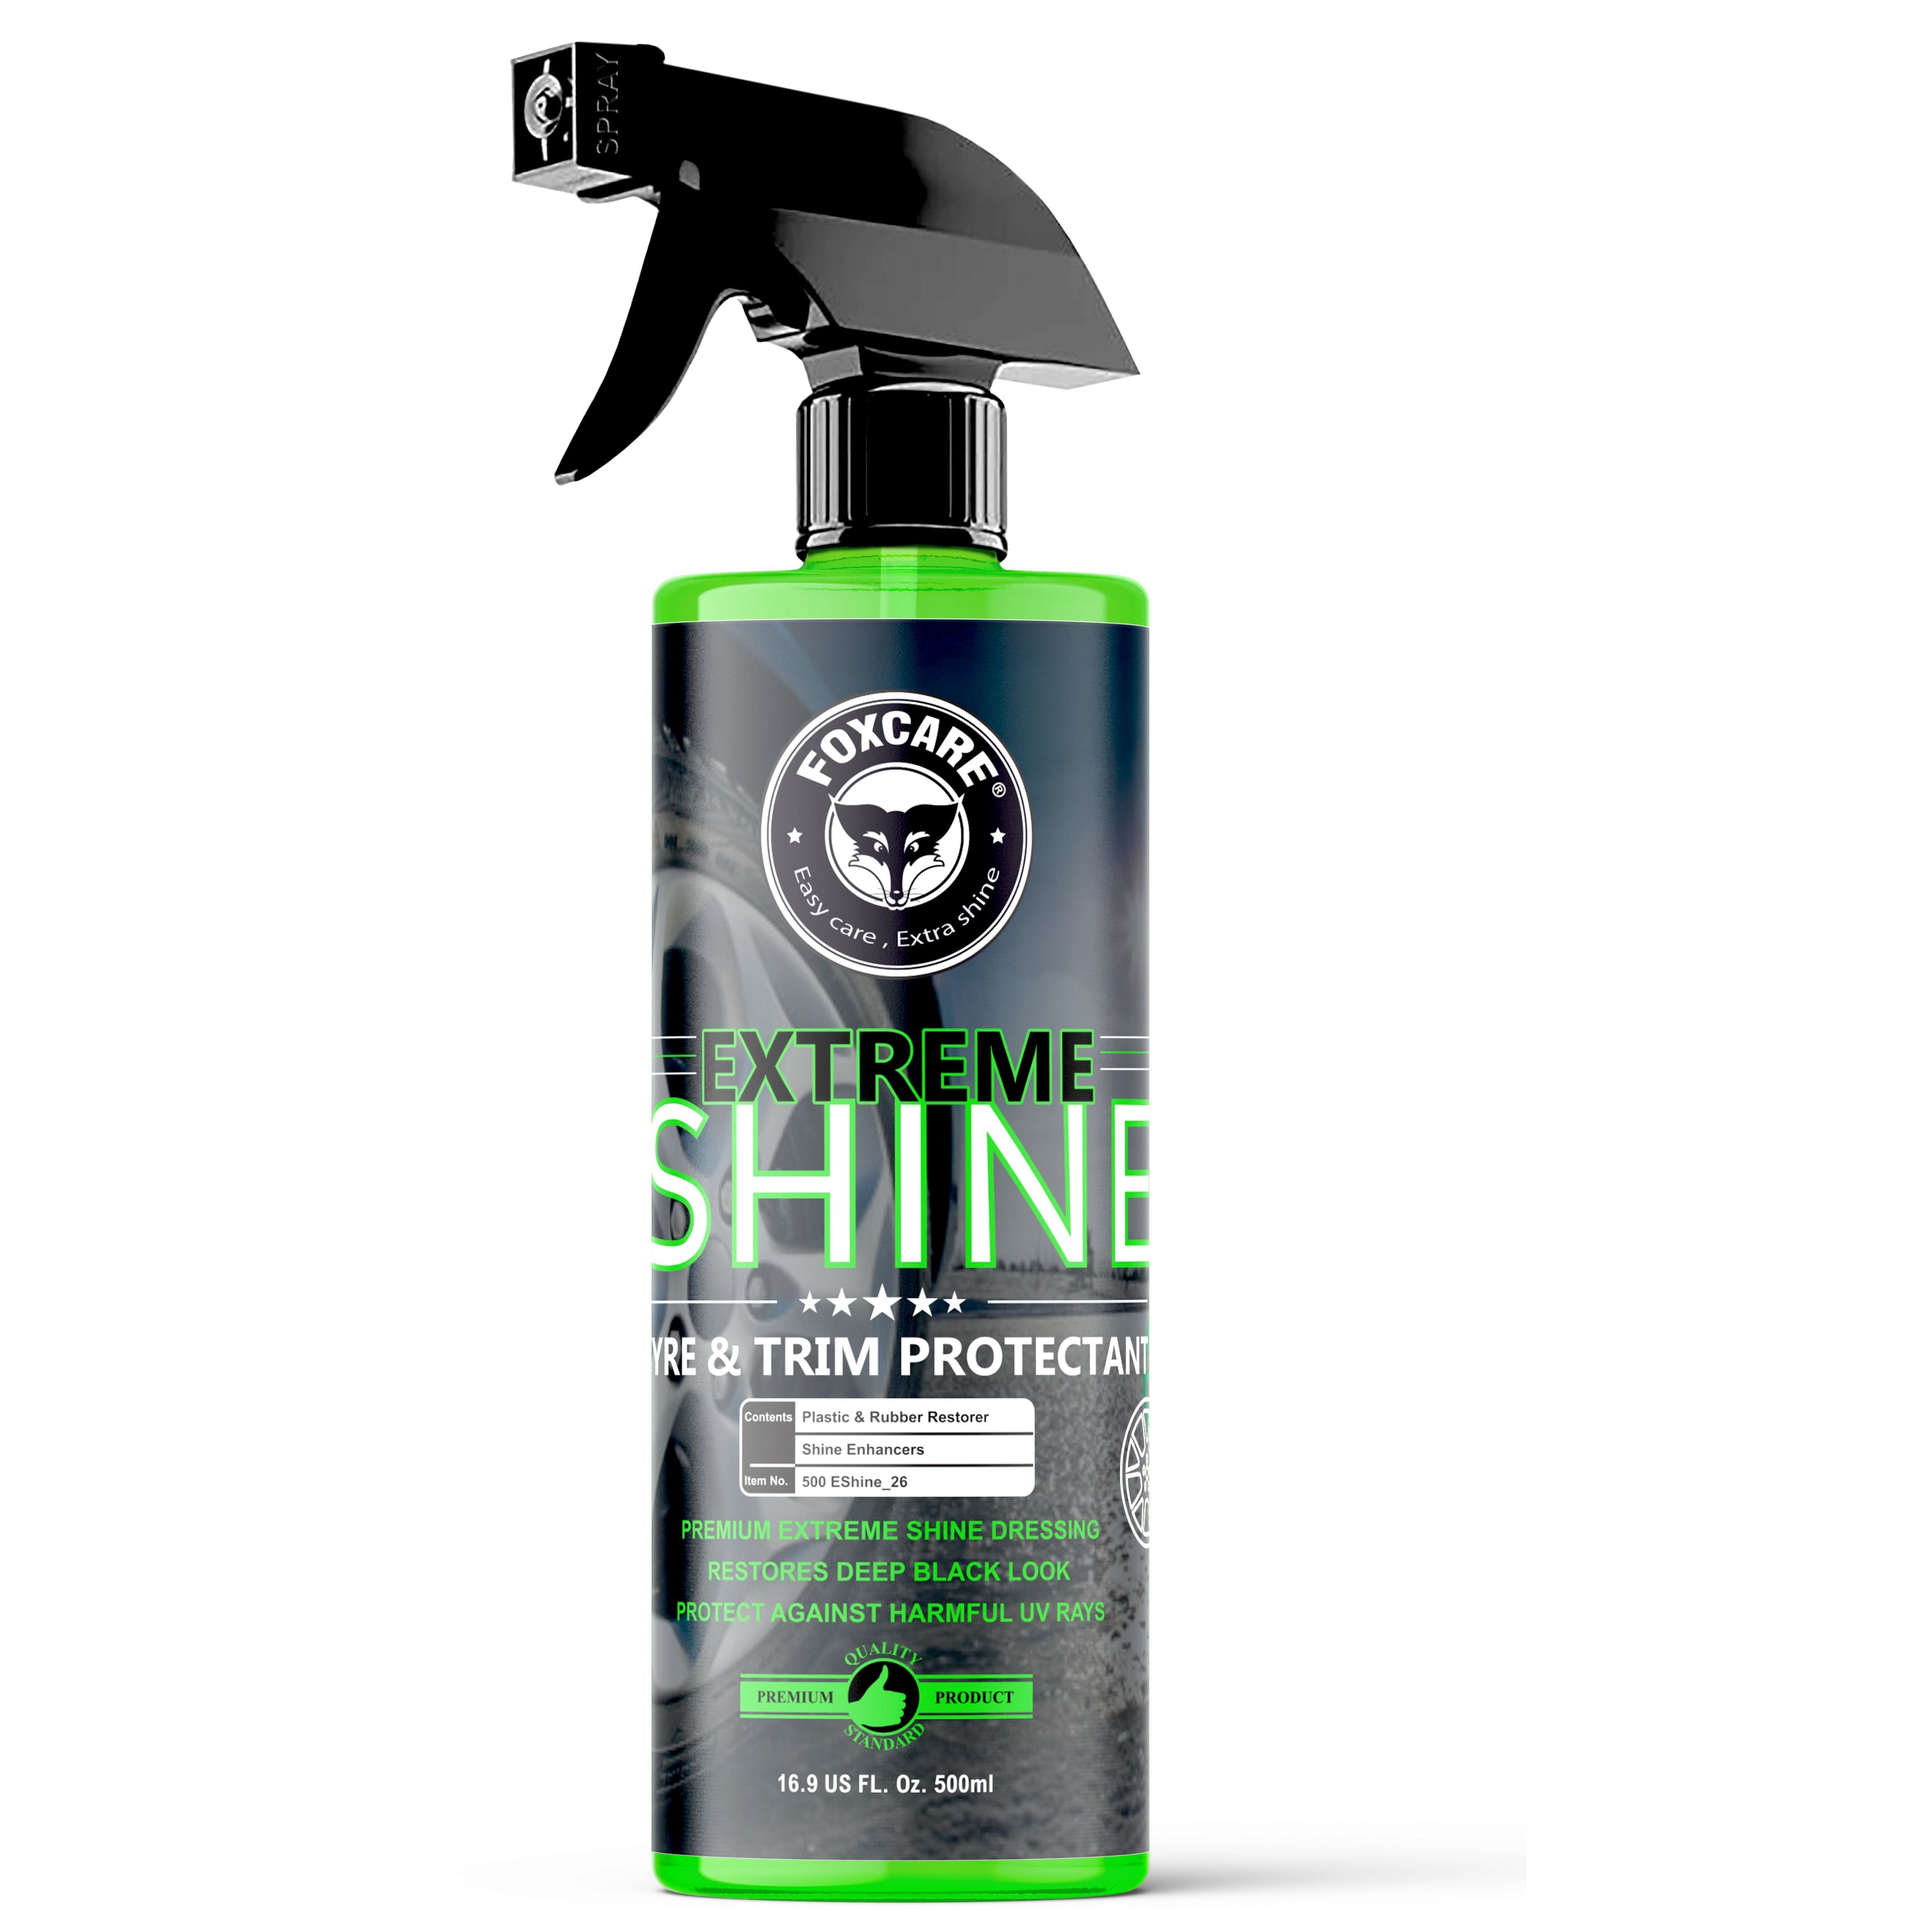 Foxcare Extreme shine - Tyre & Trim Protectant | Tyre Shiner |Tyre Polish 500 ml